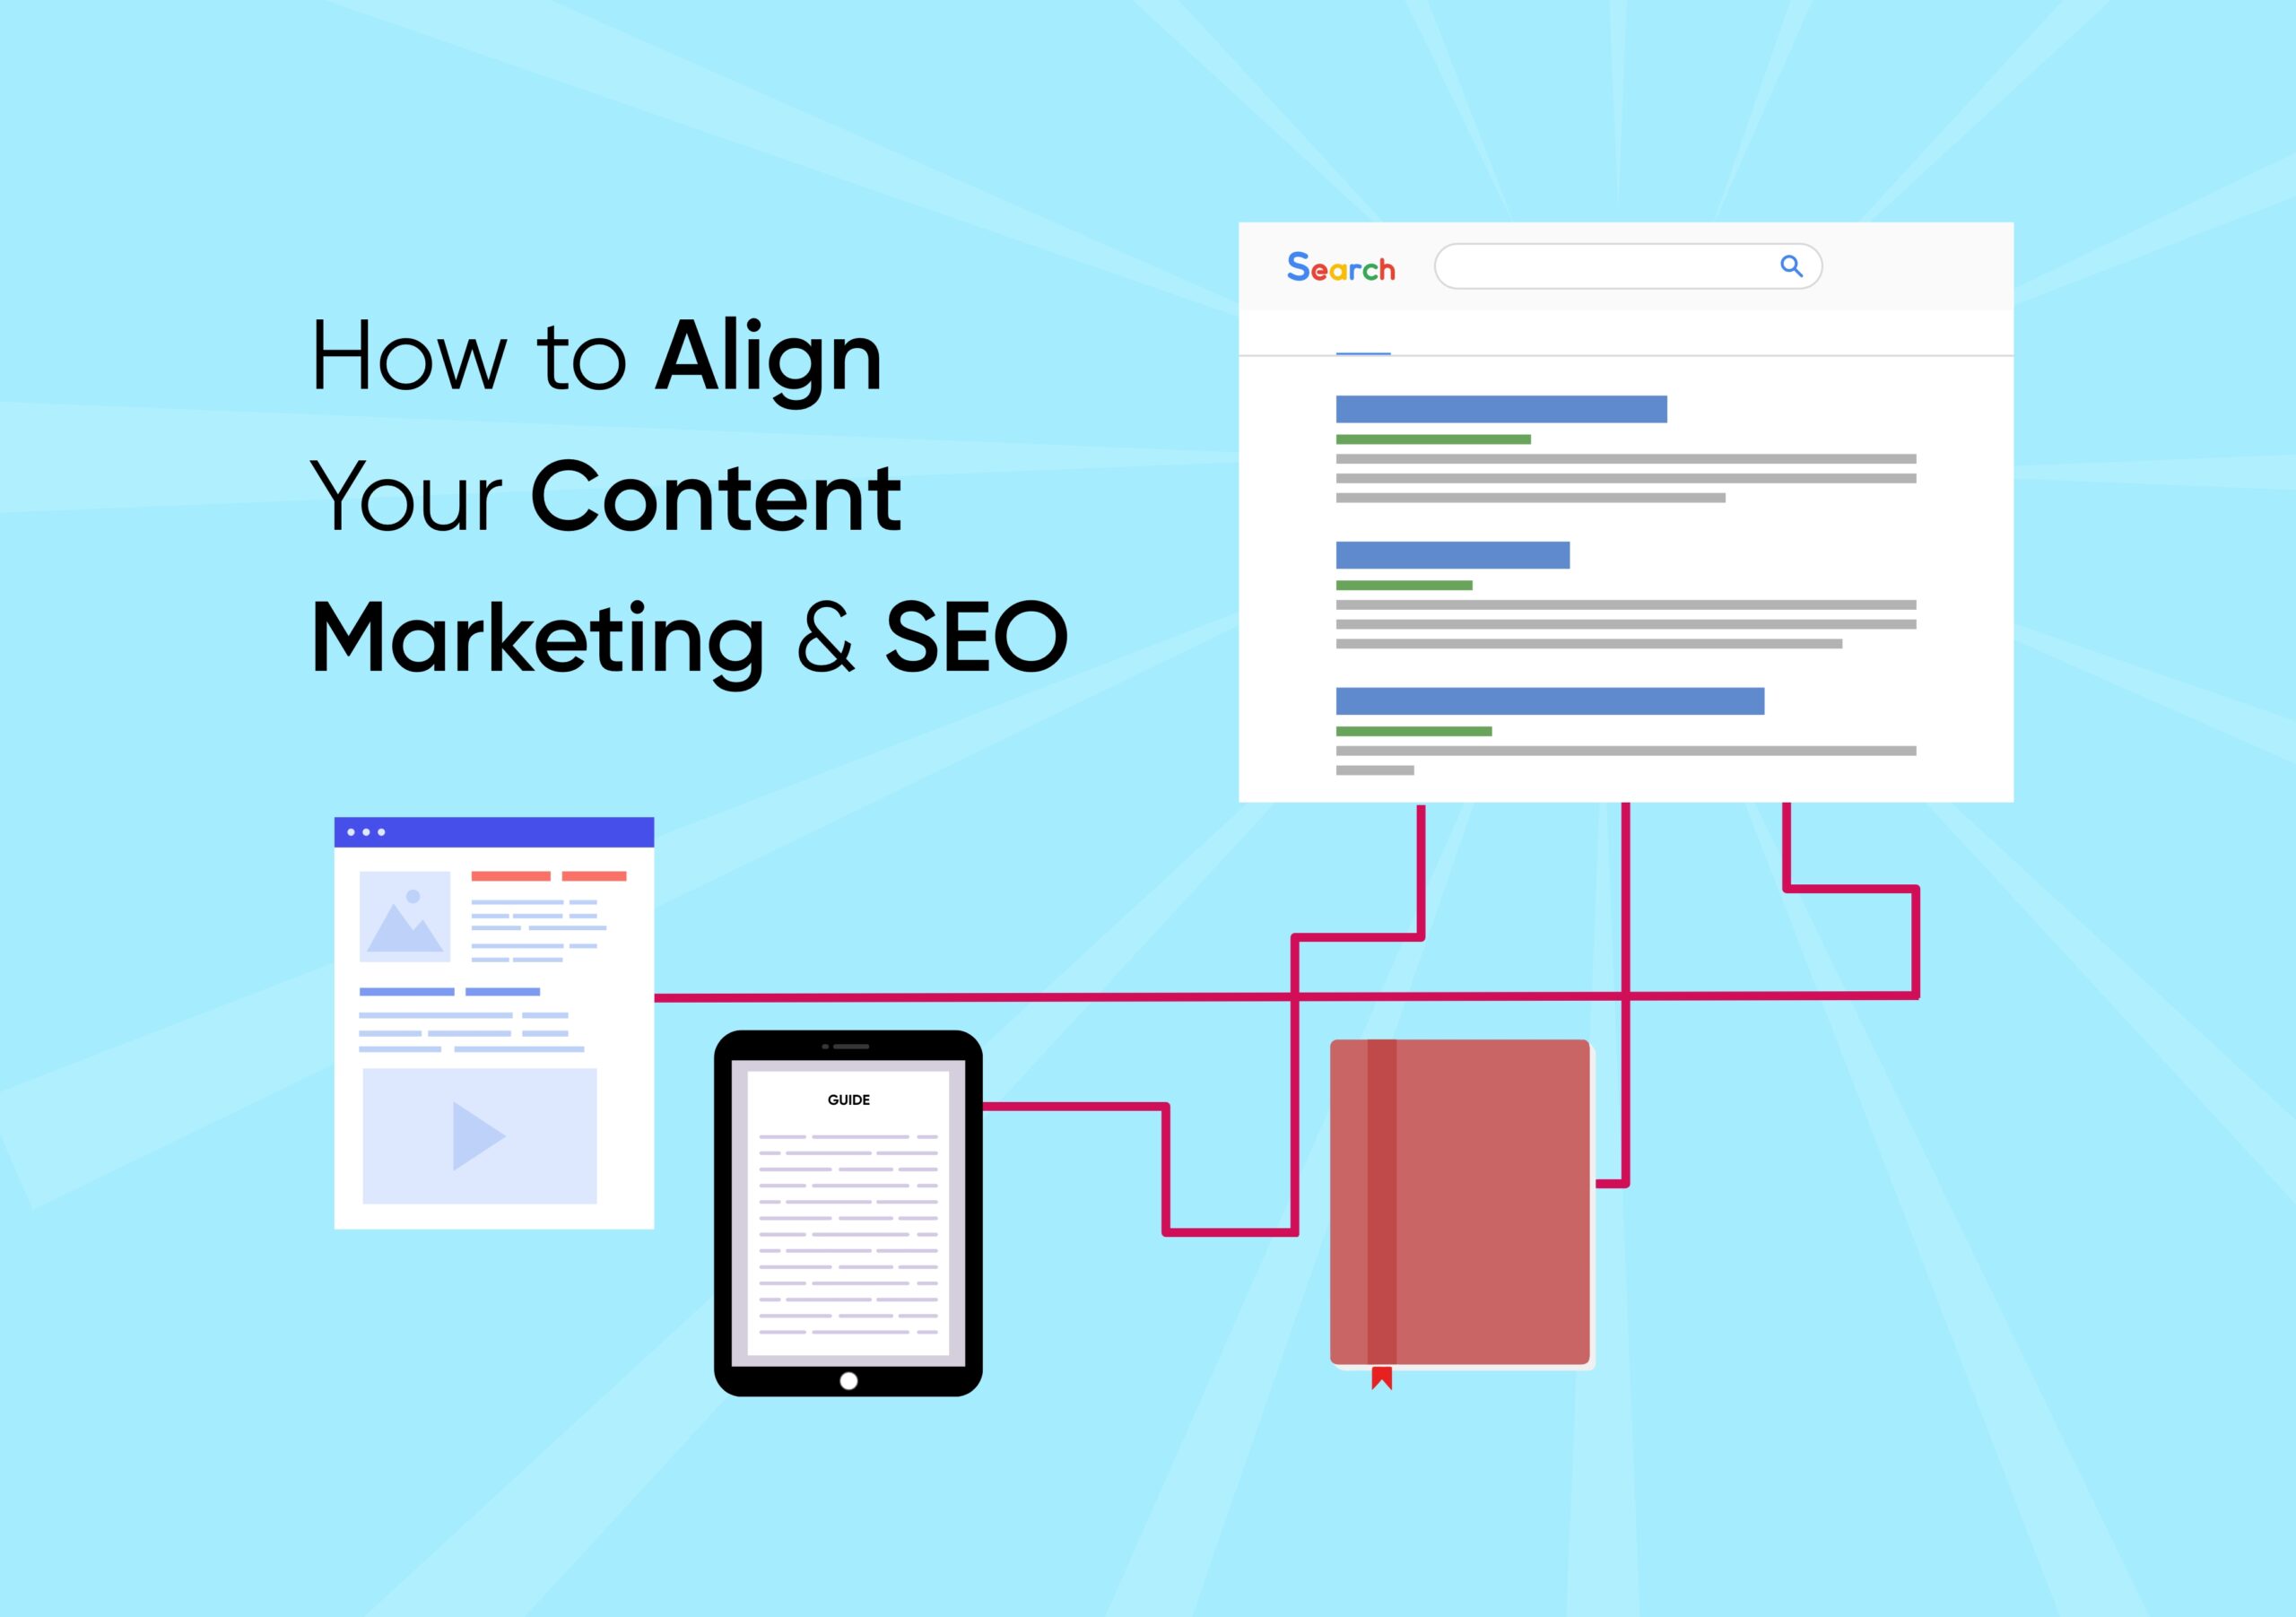 How to Align Your Content Marketing & SEO